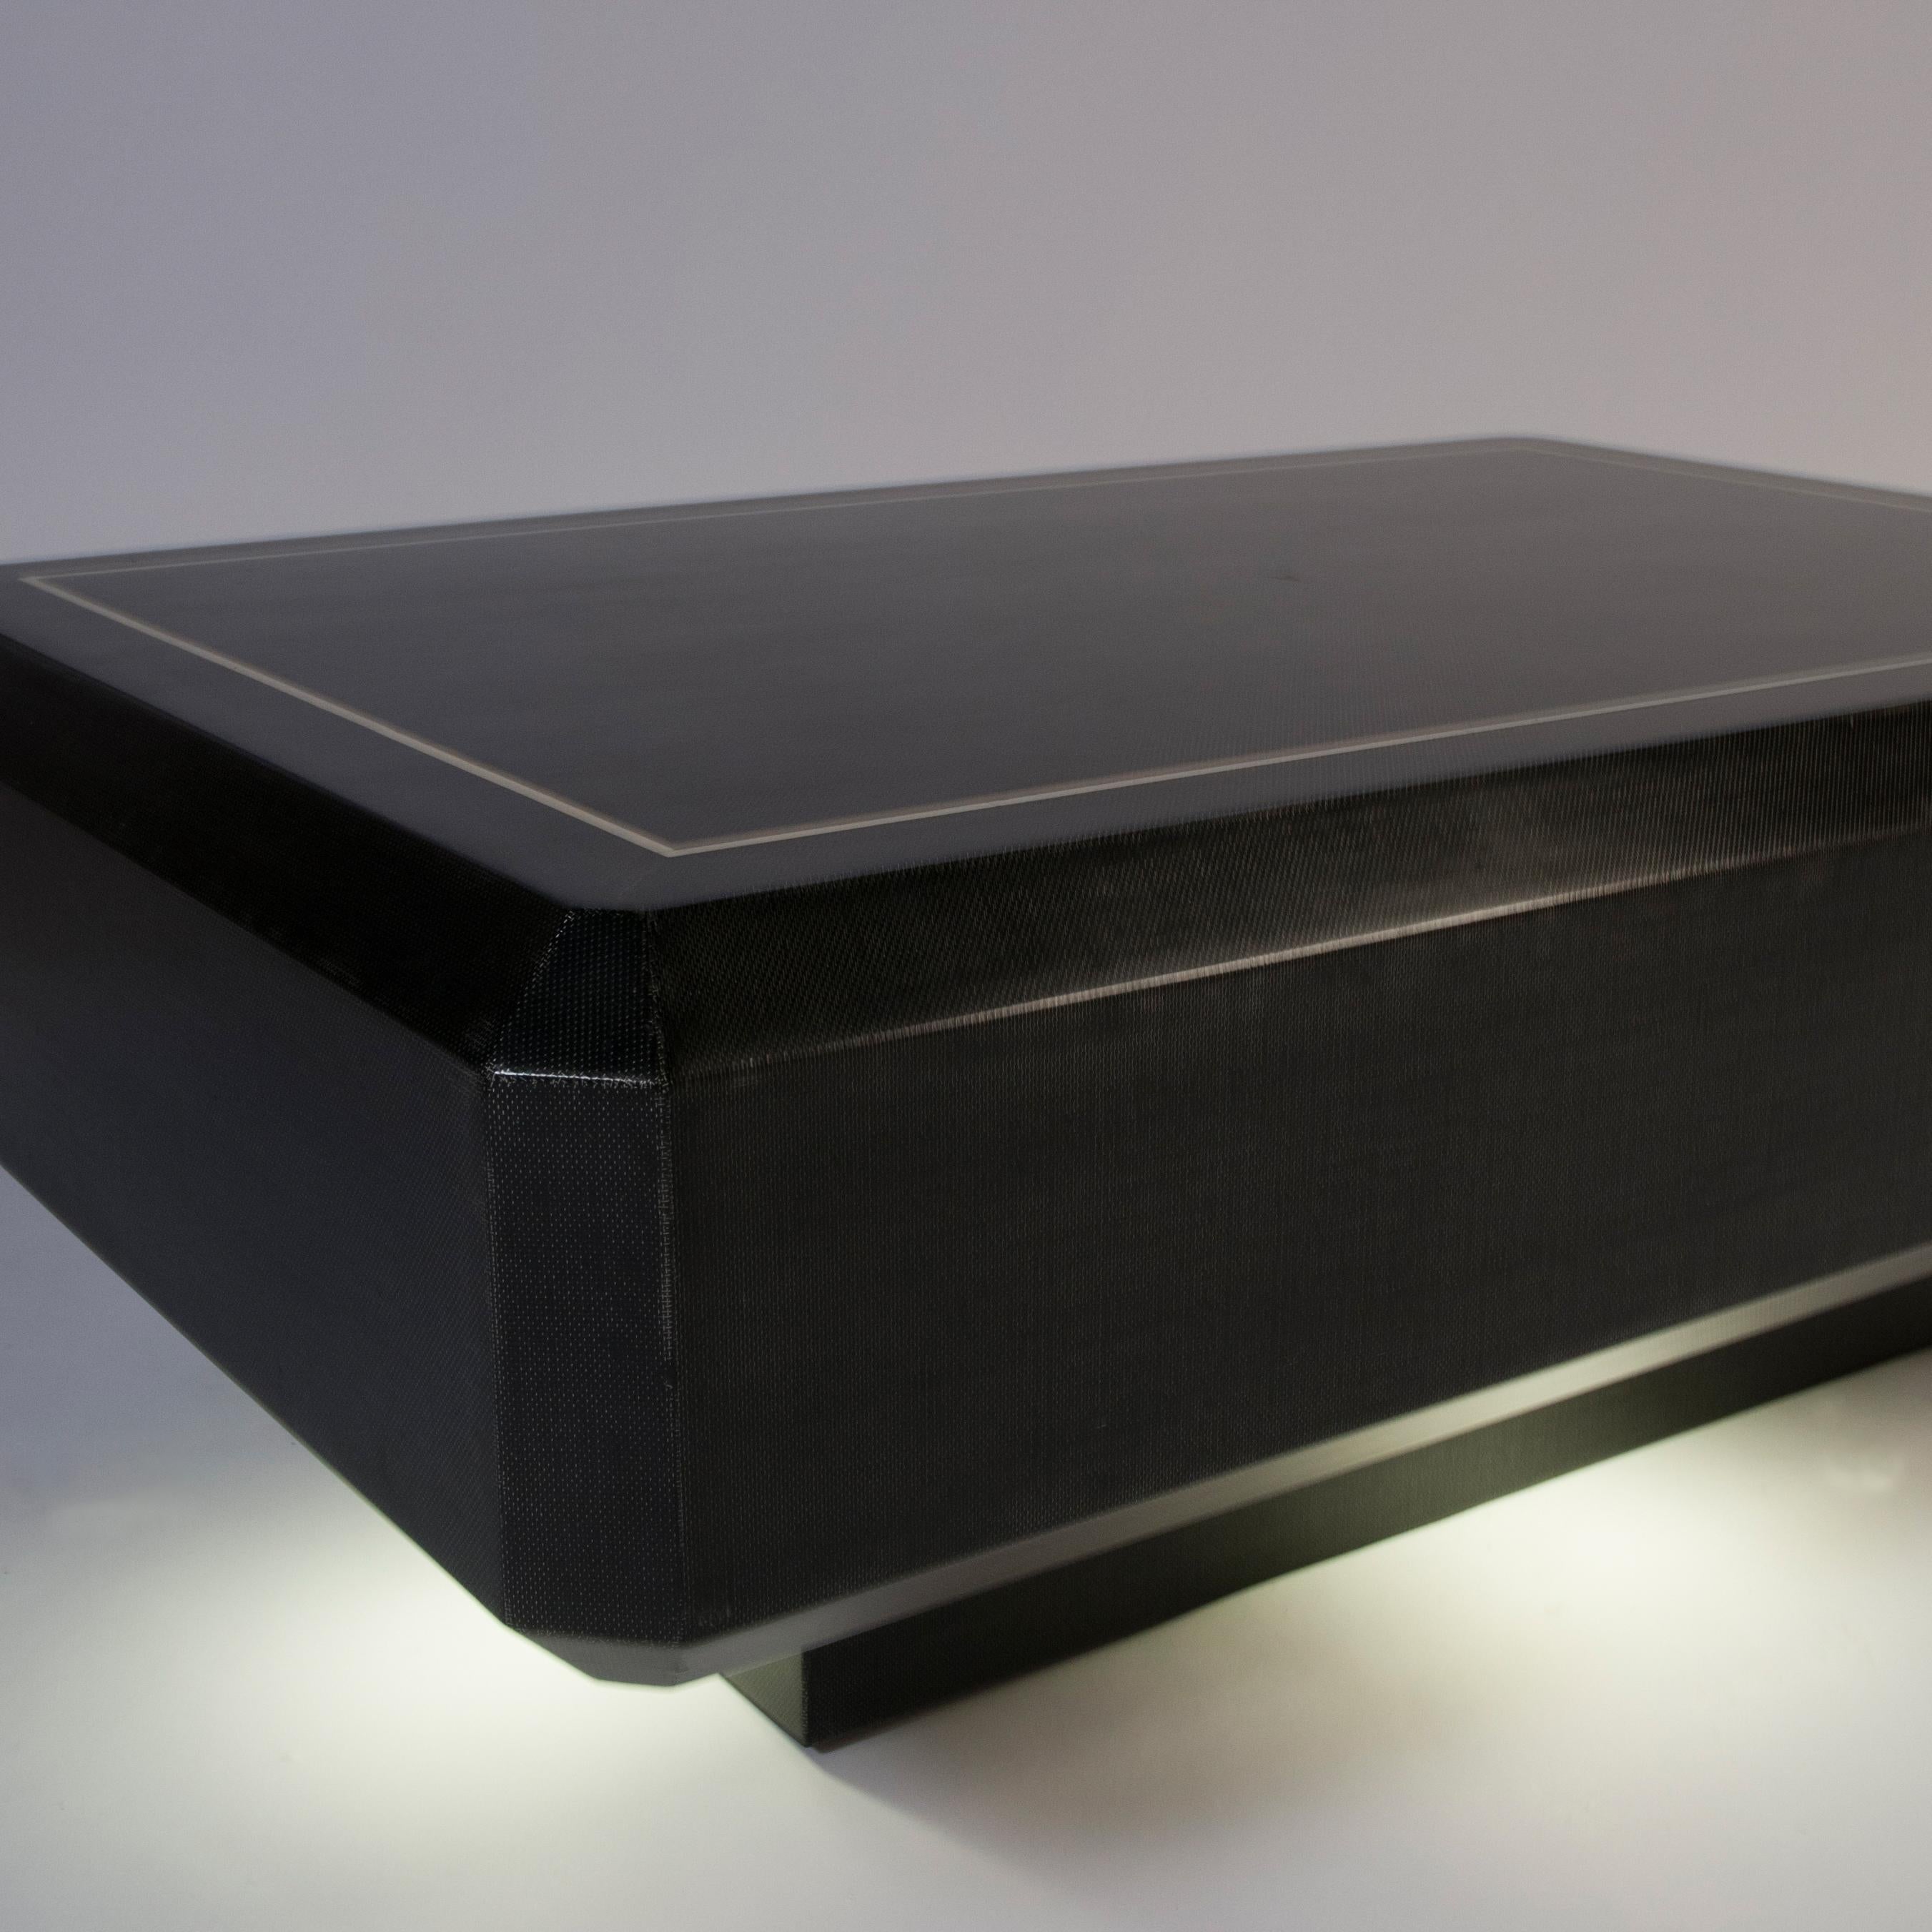 Faceted rectangular coffee table in black batik fabric with bone inlays, over pedestal base with recessed lighting, by Karl Springer, American 1970's. The recessed lighting makes this table really cool.